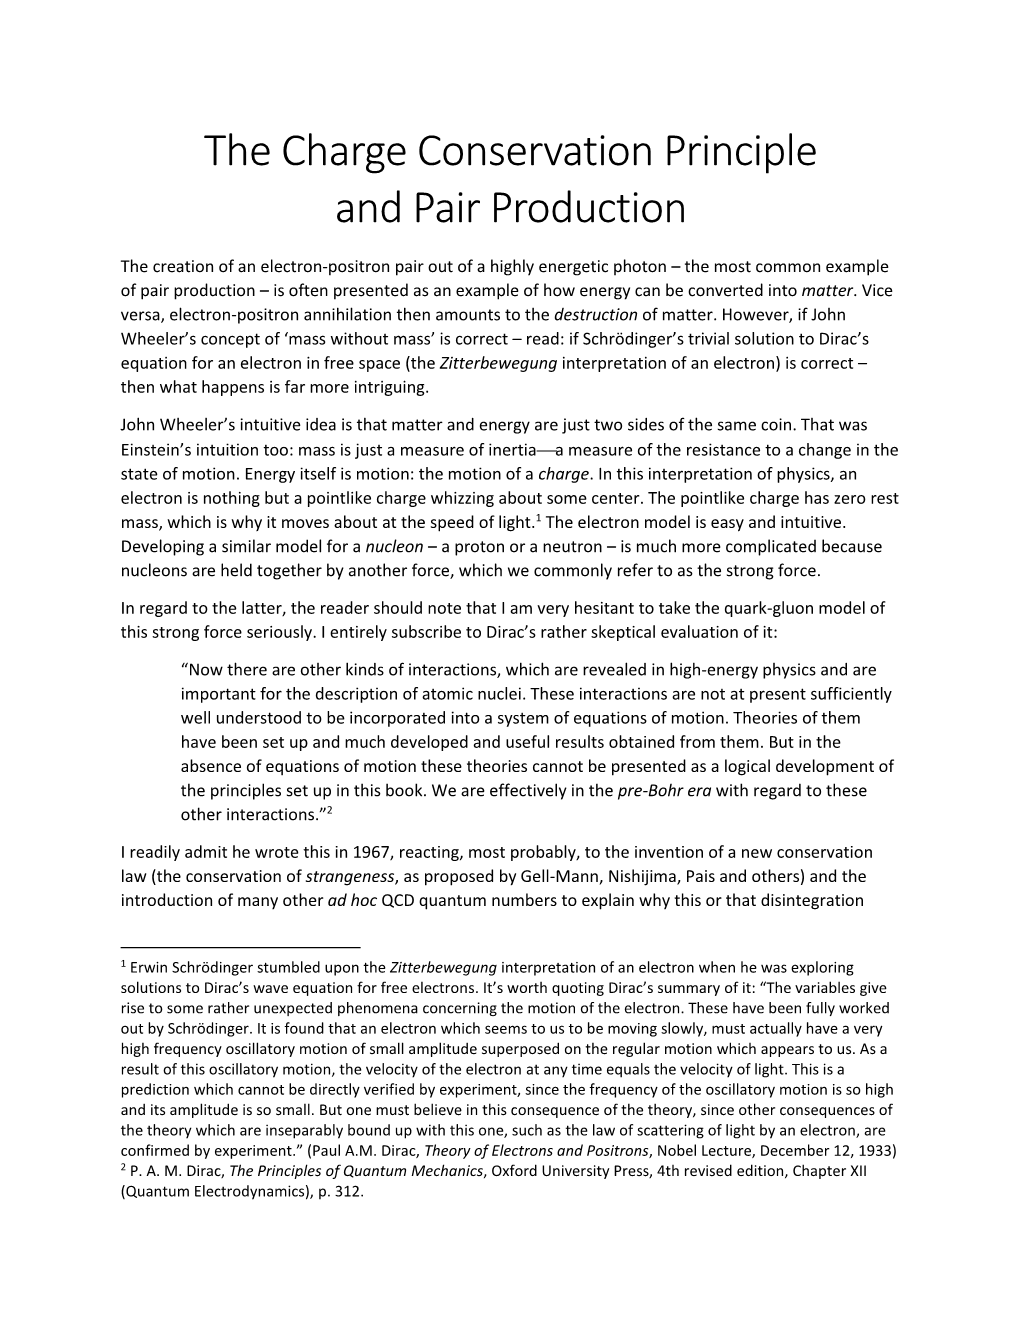 The Charge Conservation Principle and Pair Production